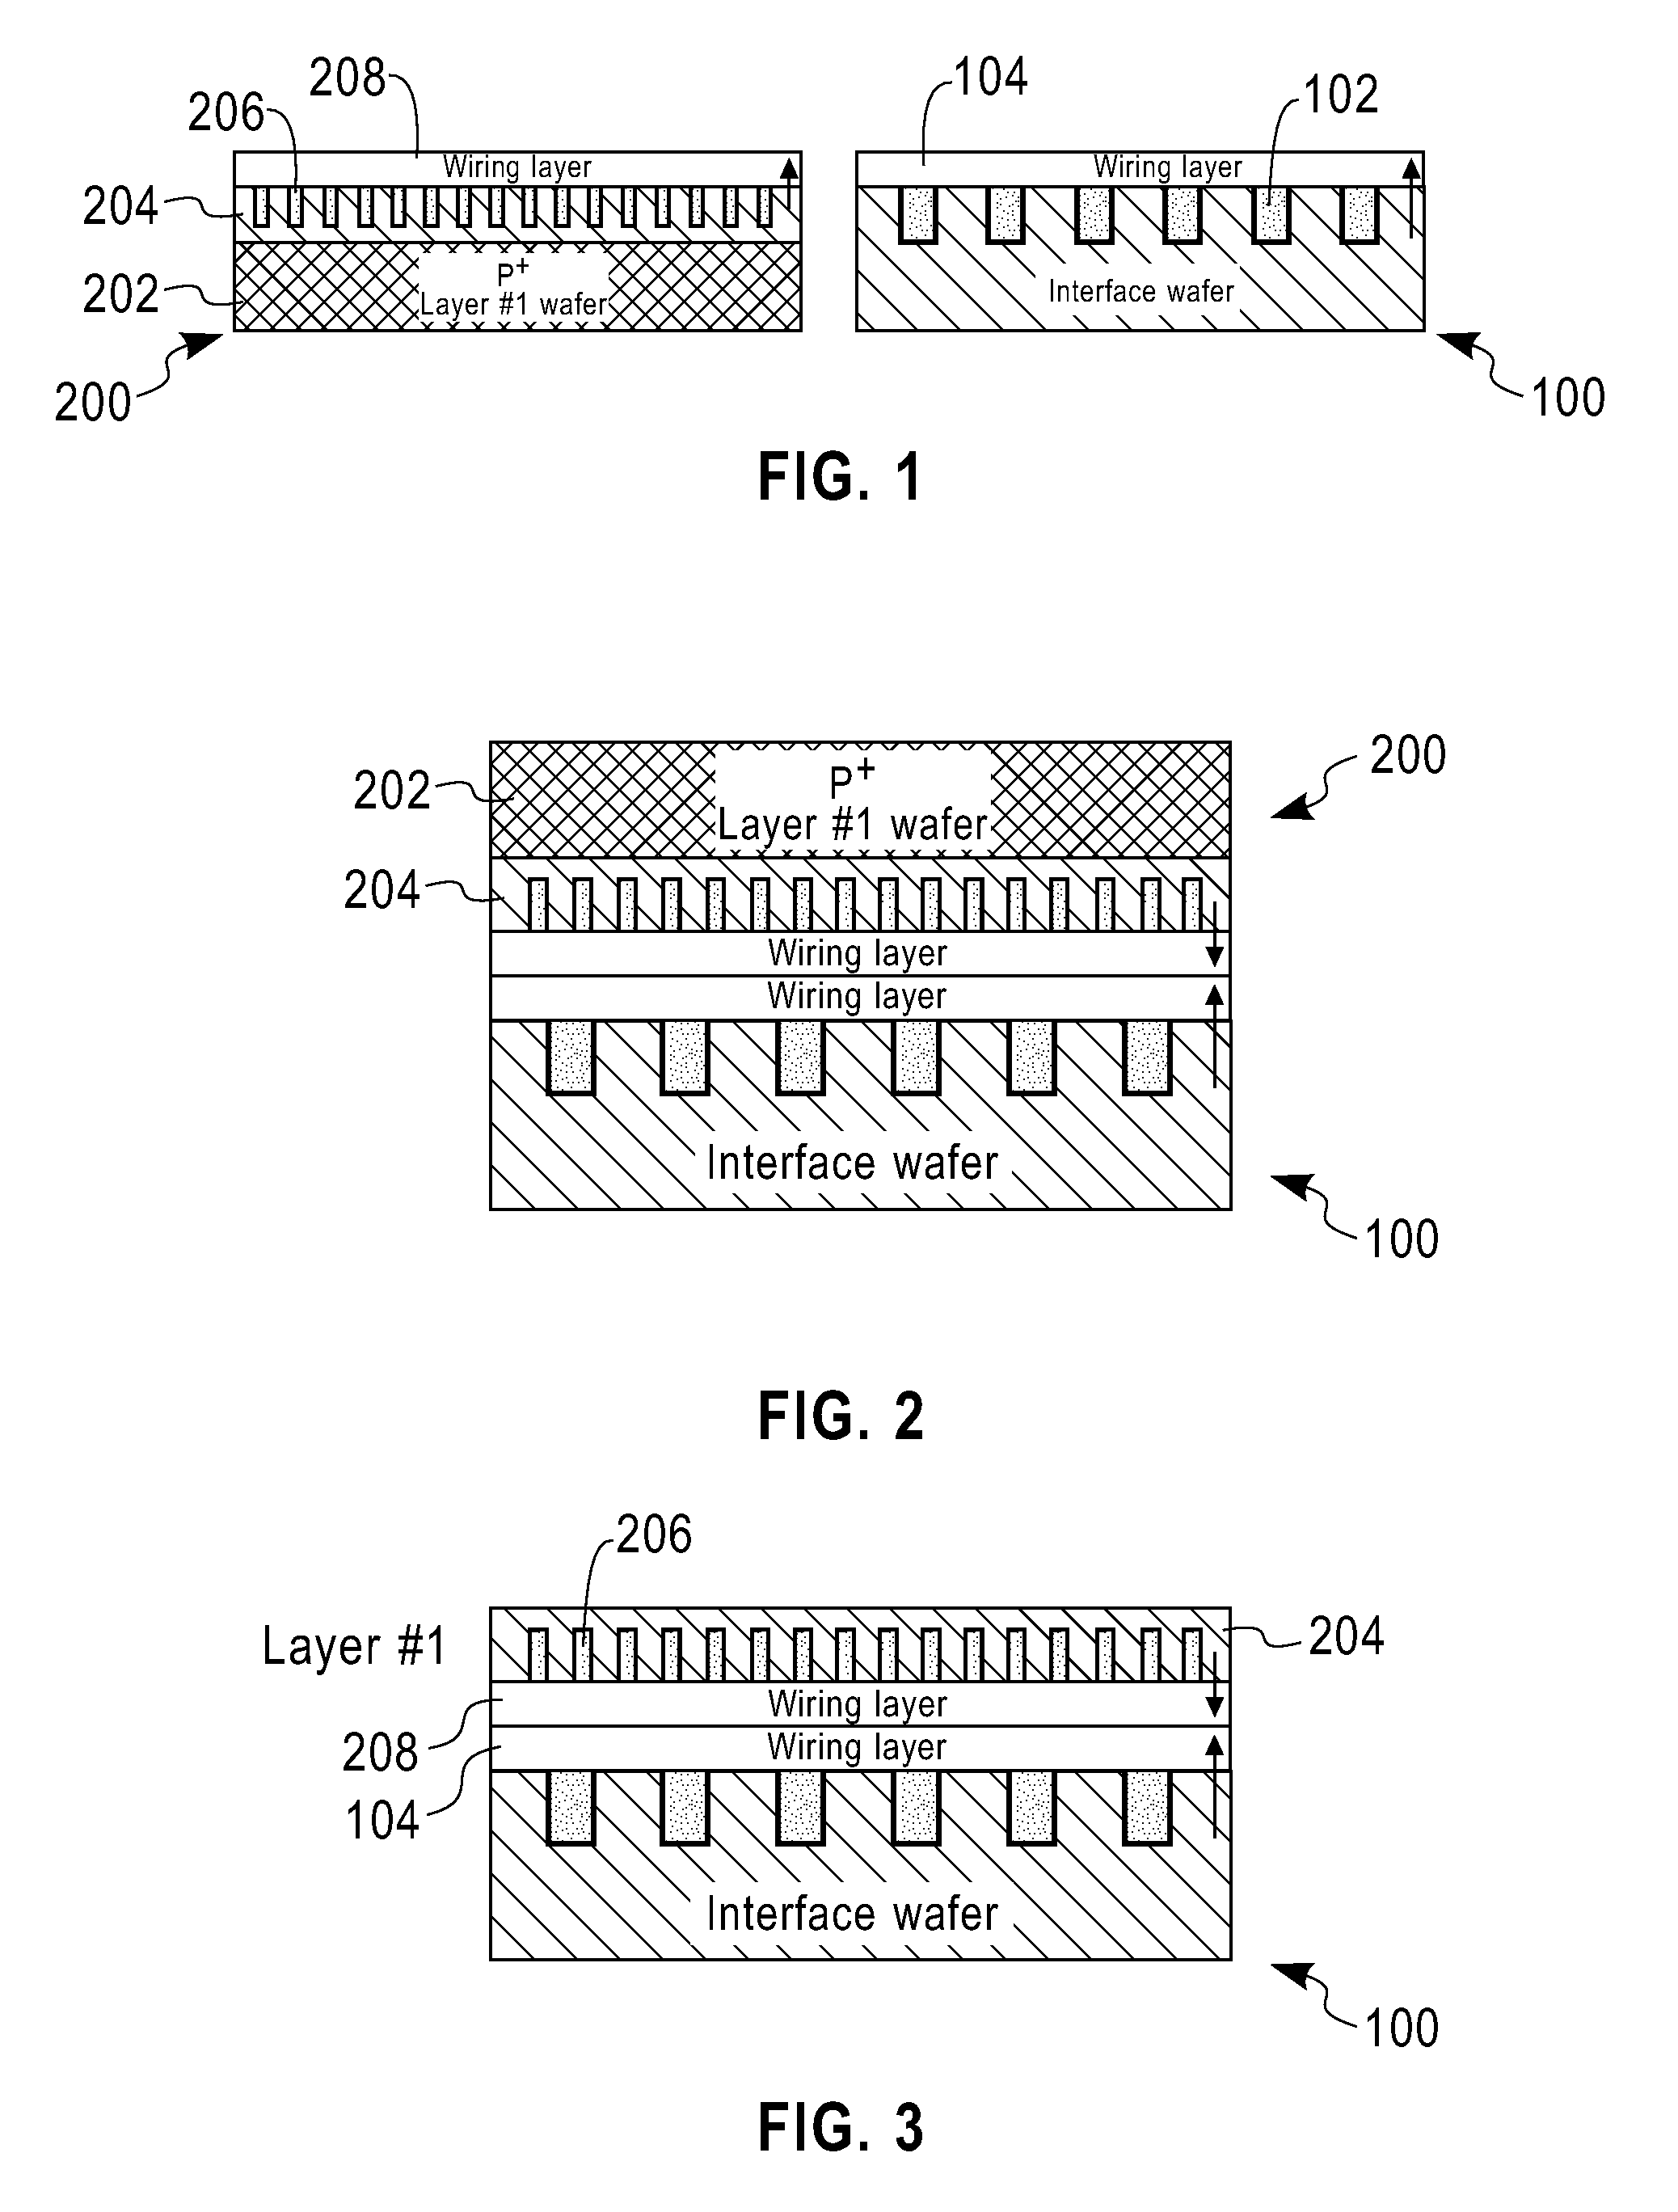 3D integrated circuit device fabrication with precisely controllable substrate removal